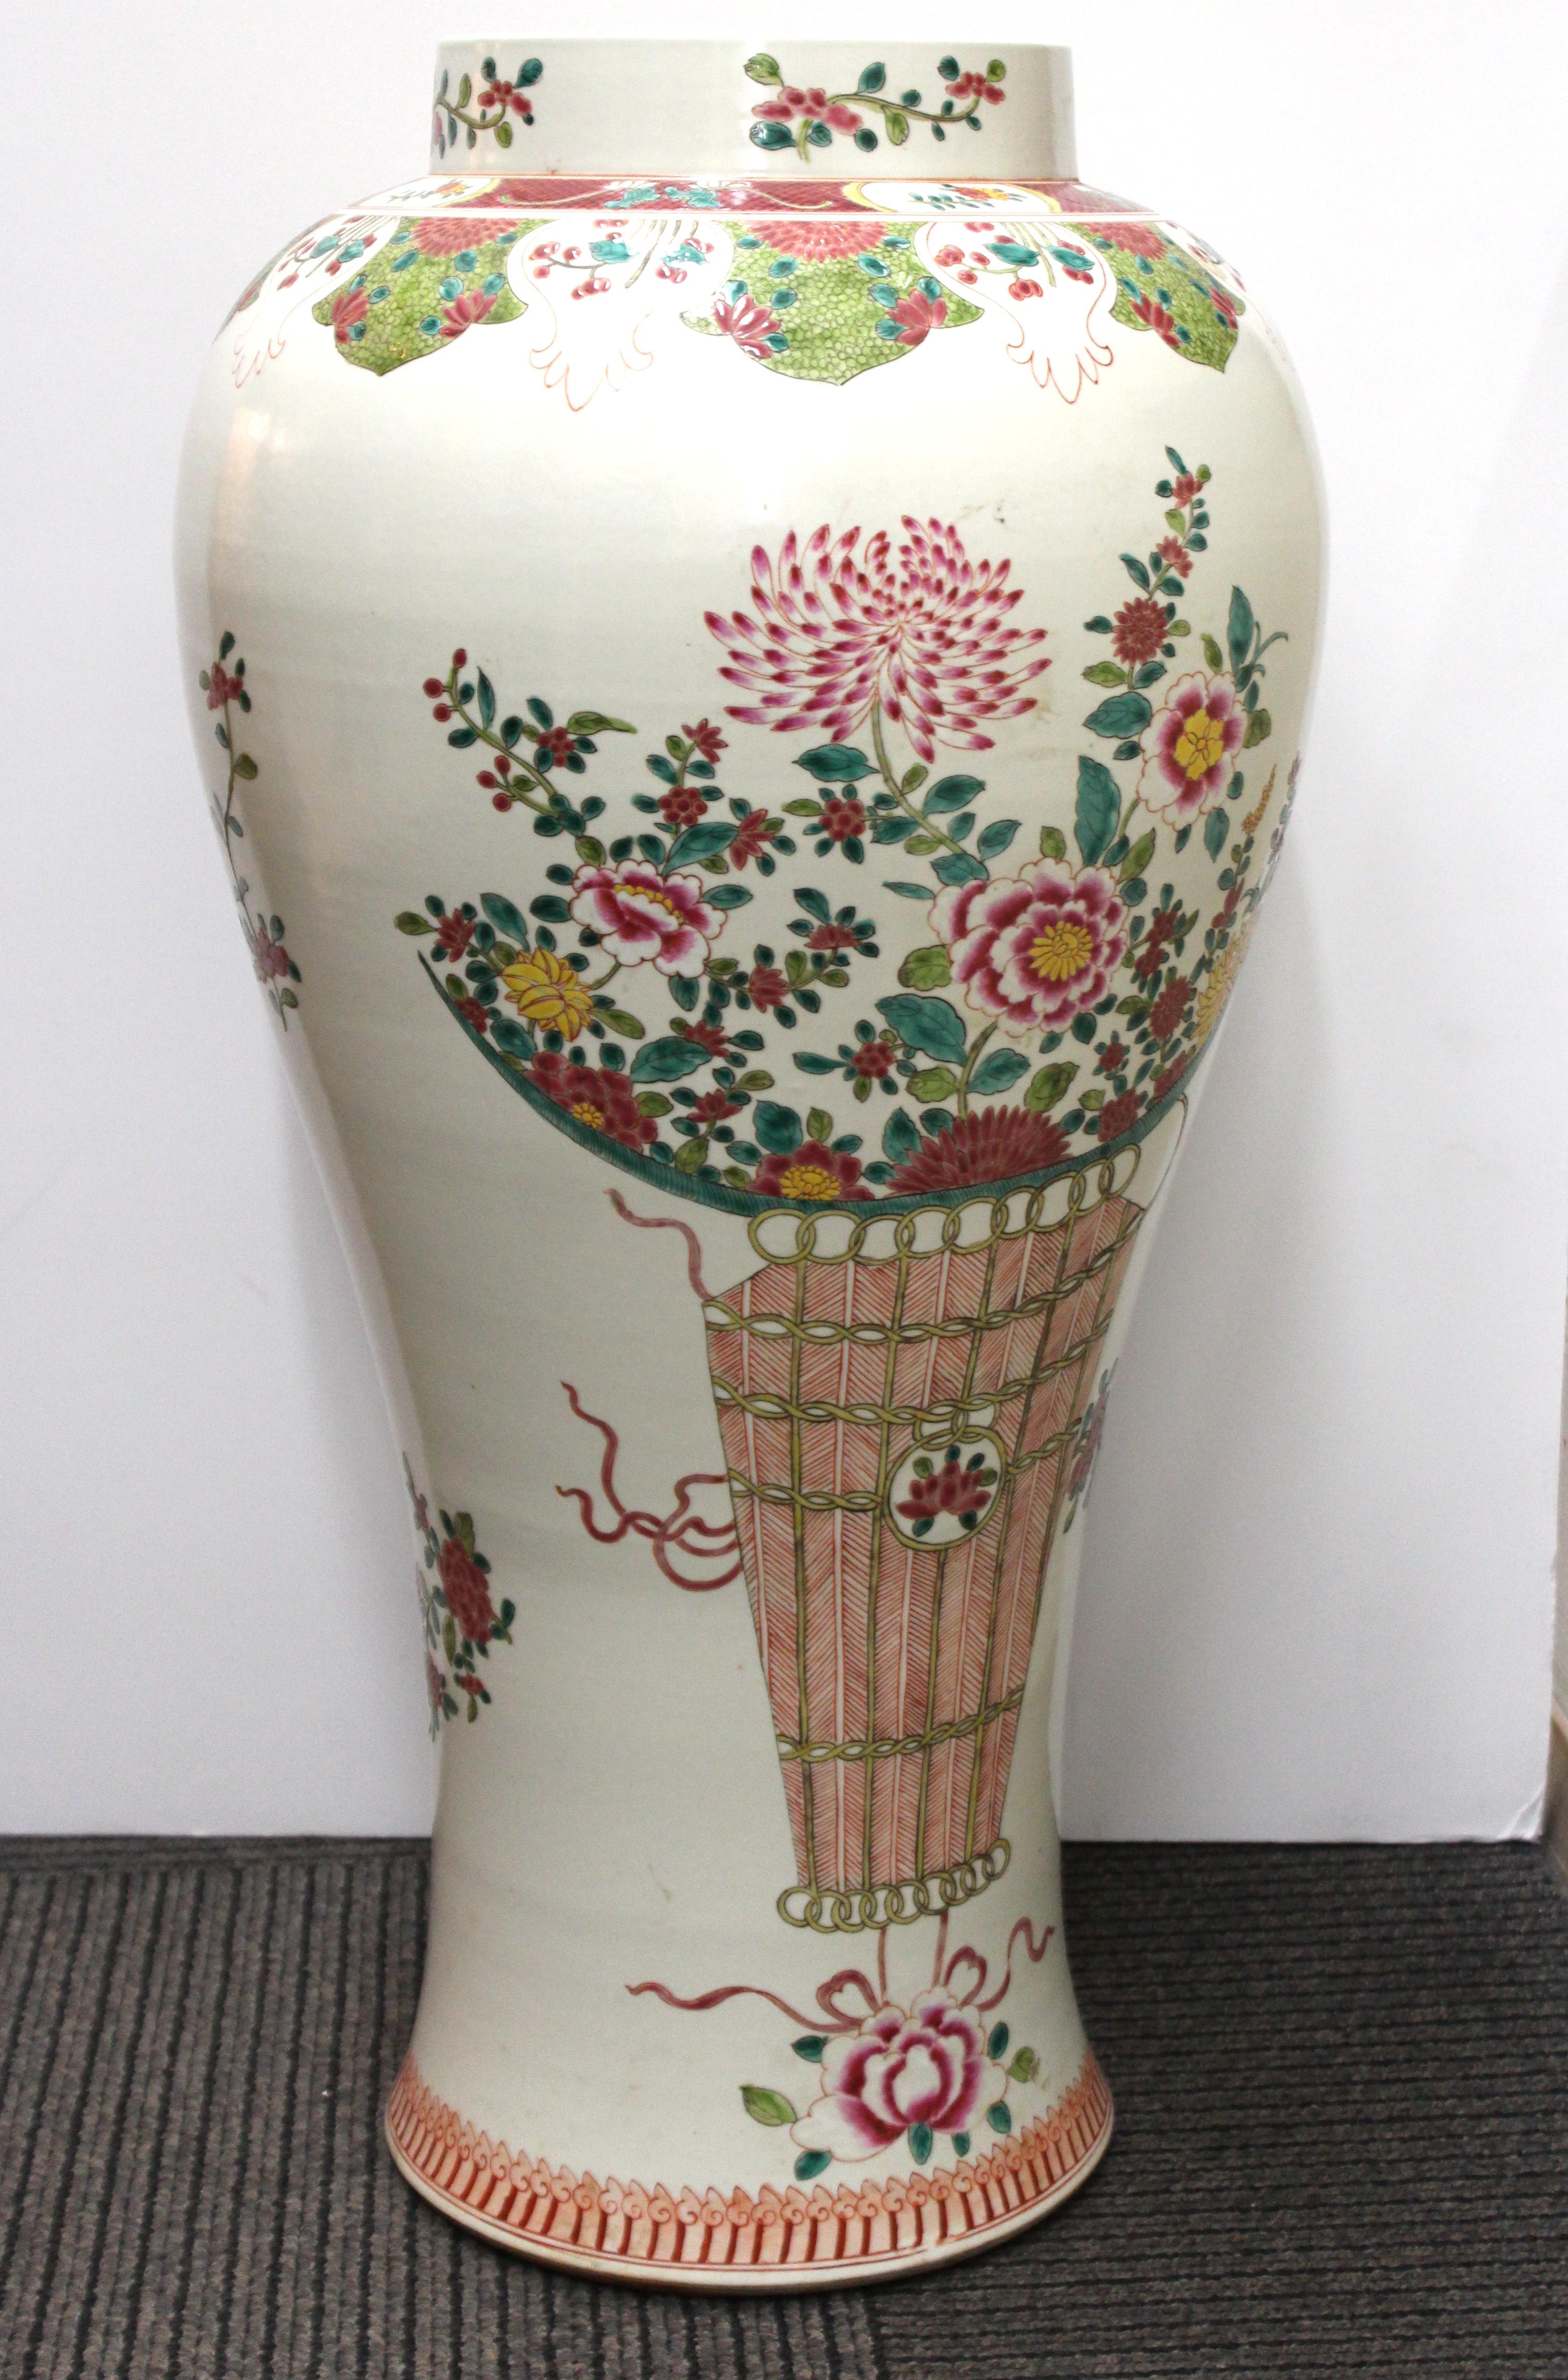 Chinese Famille Rose porcelain vase with a colorful decorative pattern. The piece dates from the mid-20th century and is in great vintage condition.